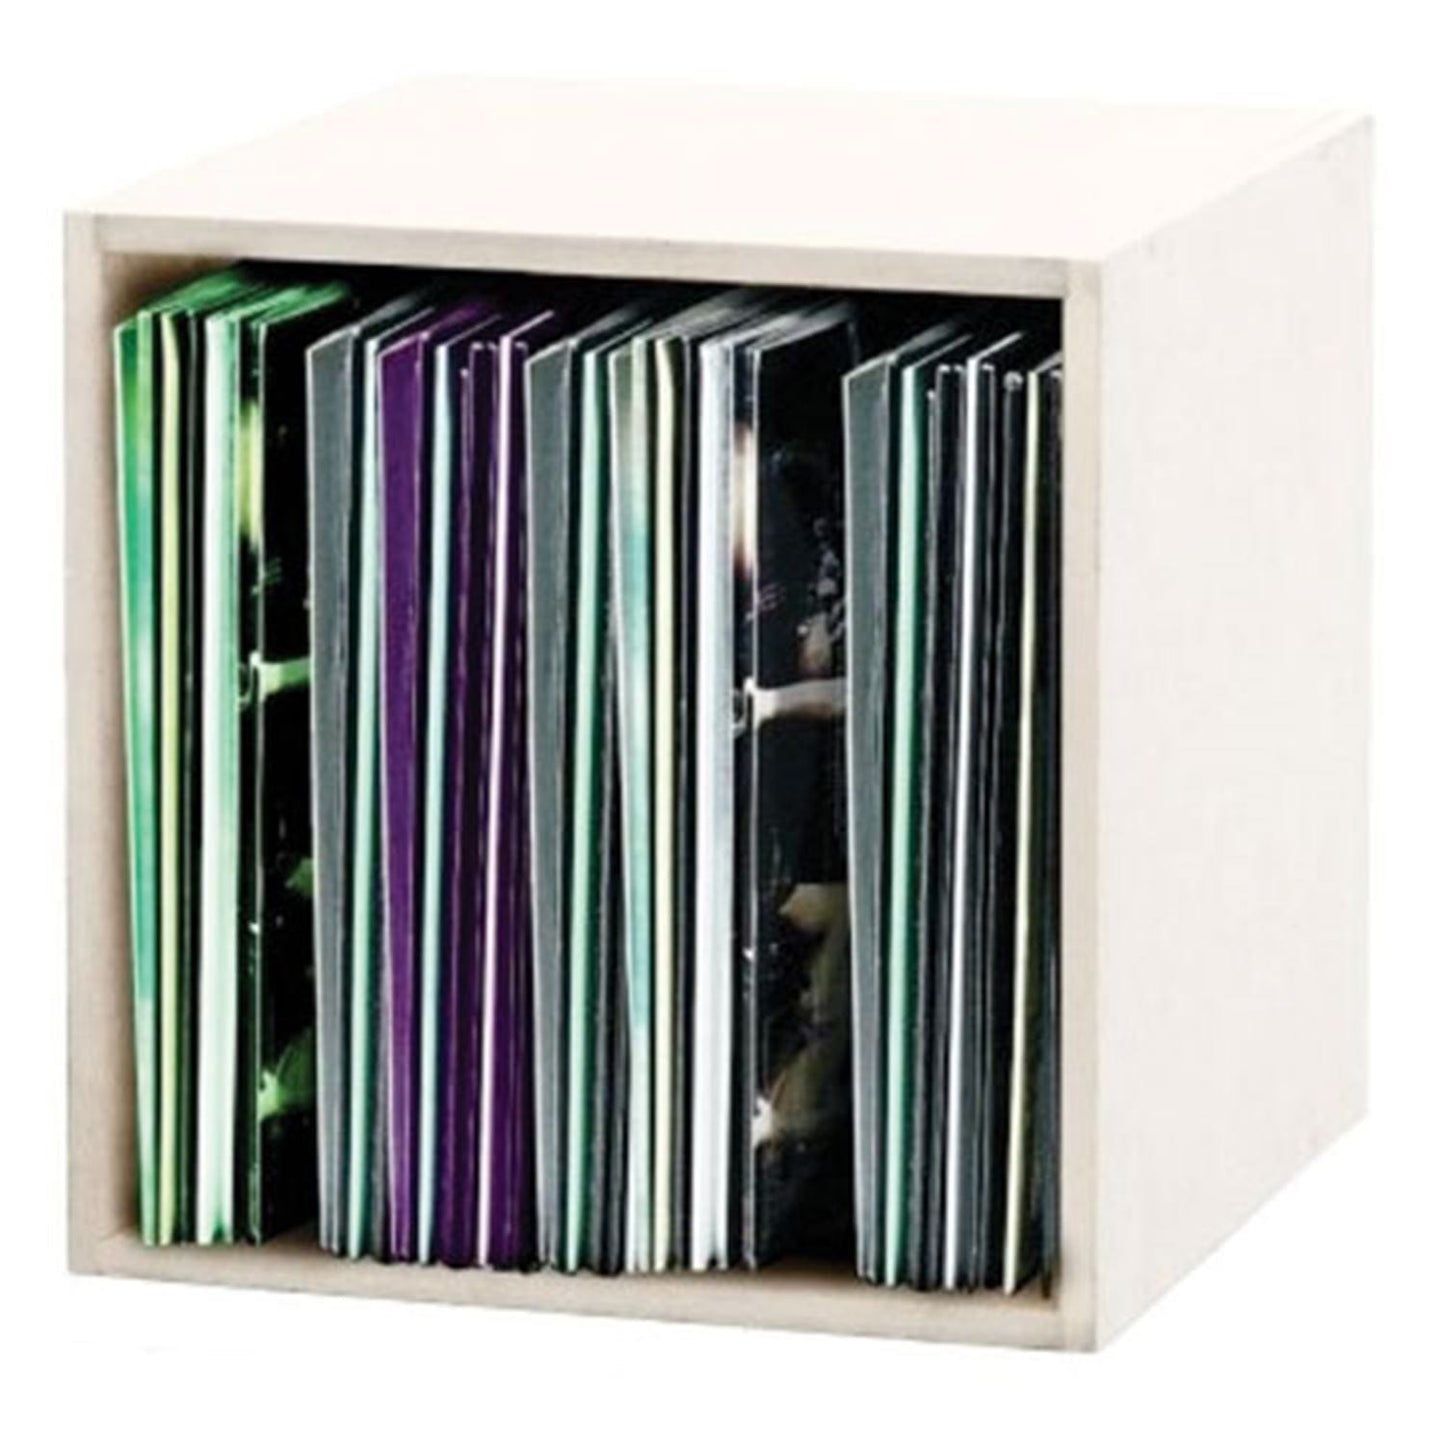 Glorious 219101 Lp Record Box Holds 110 Lps White - ProSound and Stage Lighting